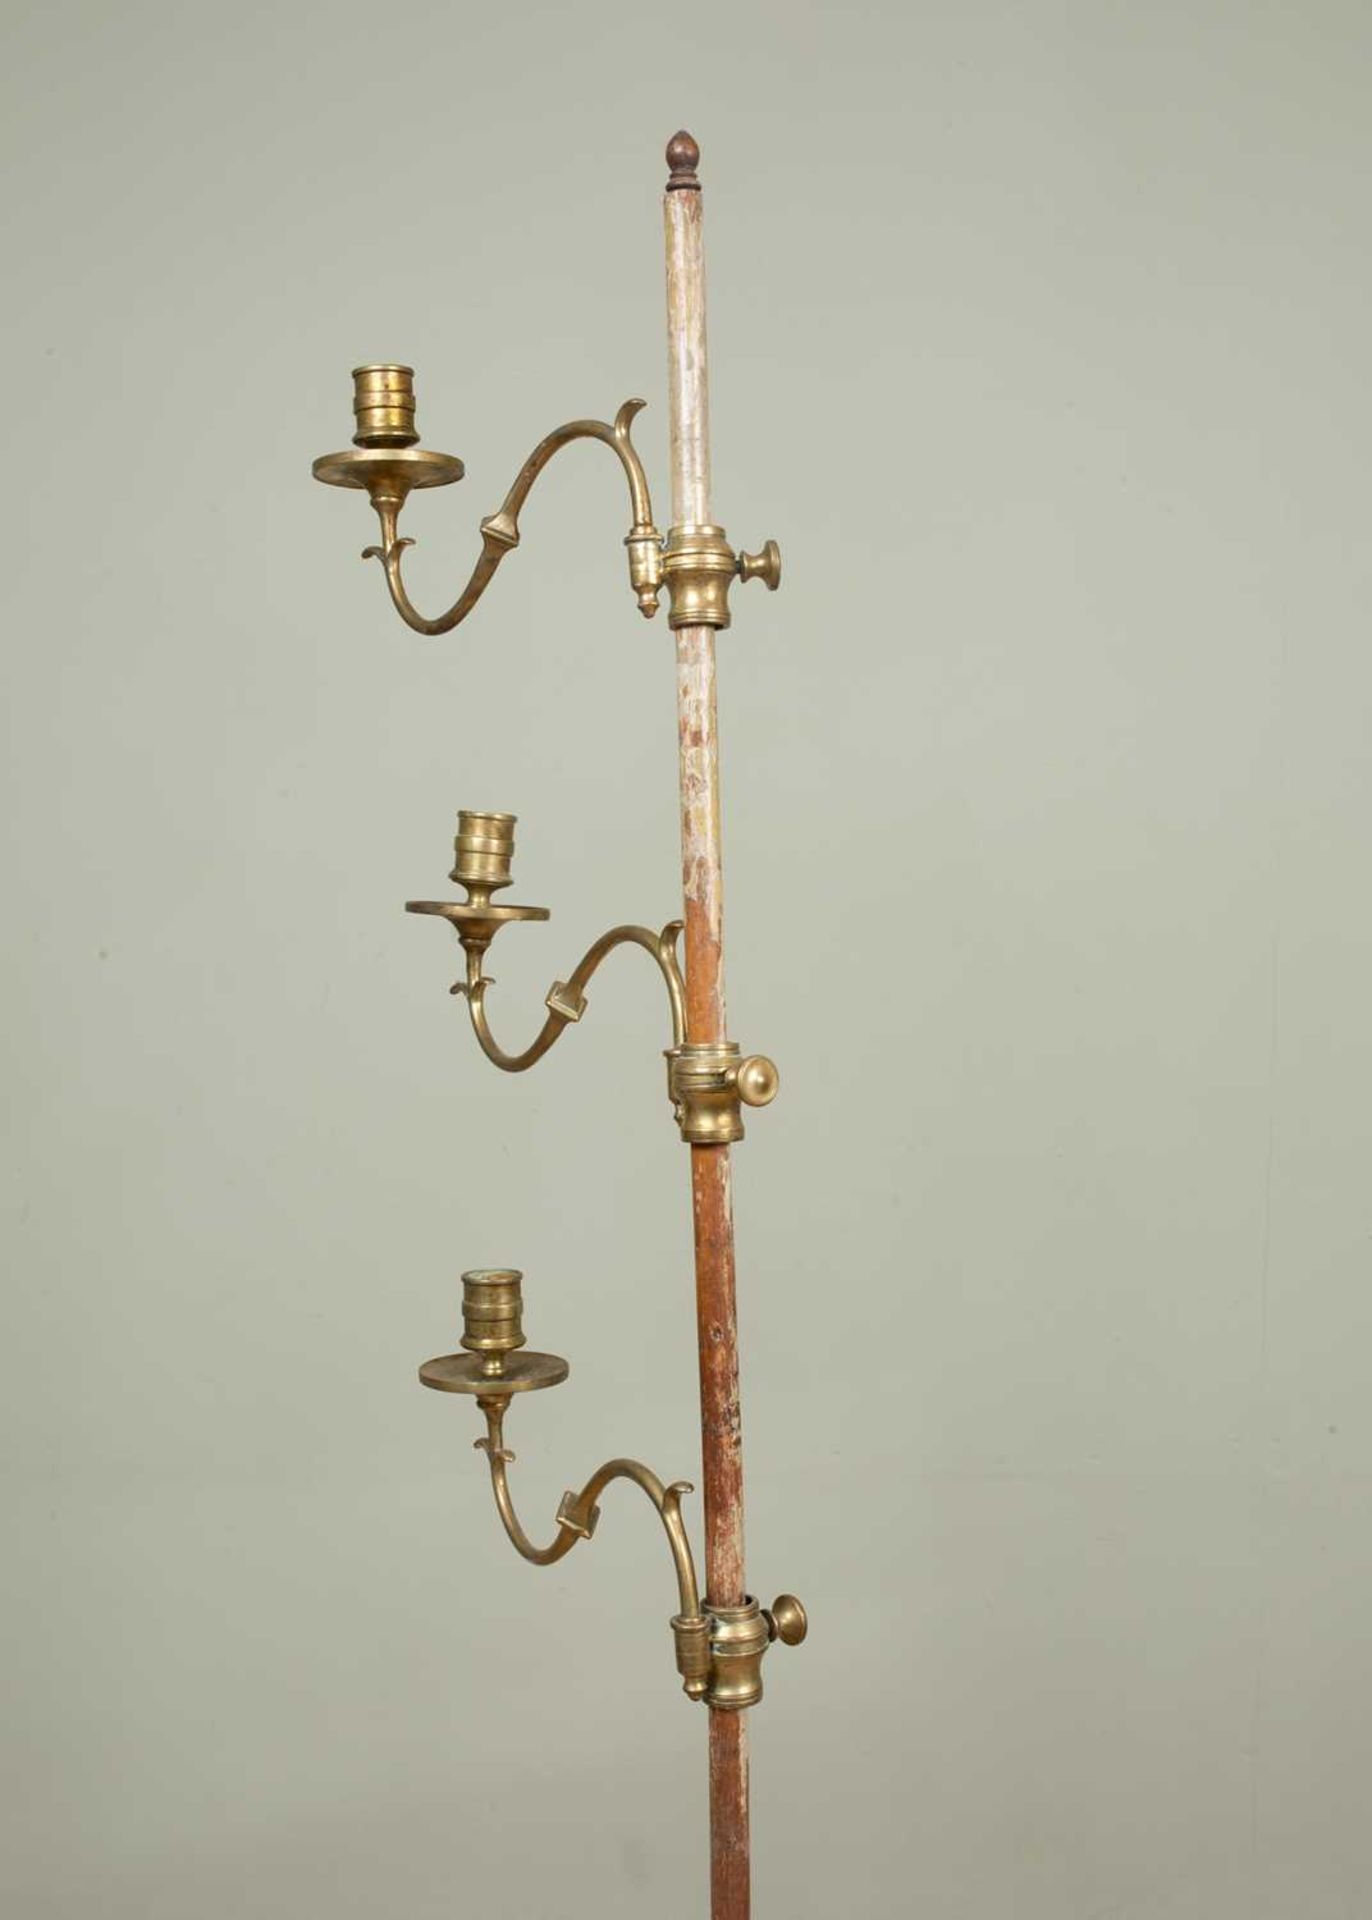 A 19th century painted wooden floor standing candle stand with three adjustable sconces, carved - Image 3 of 5